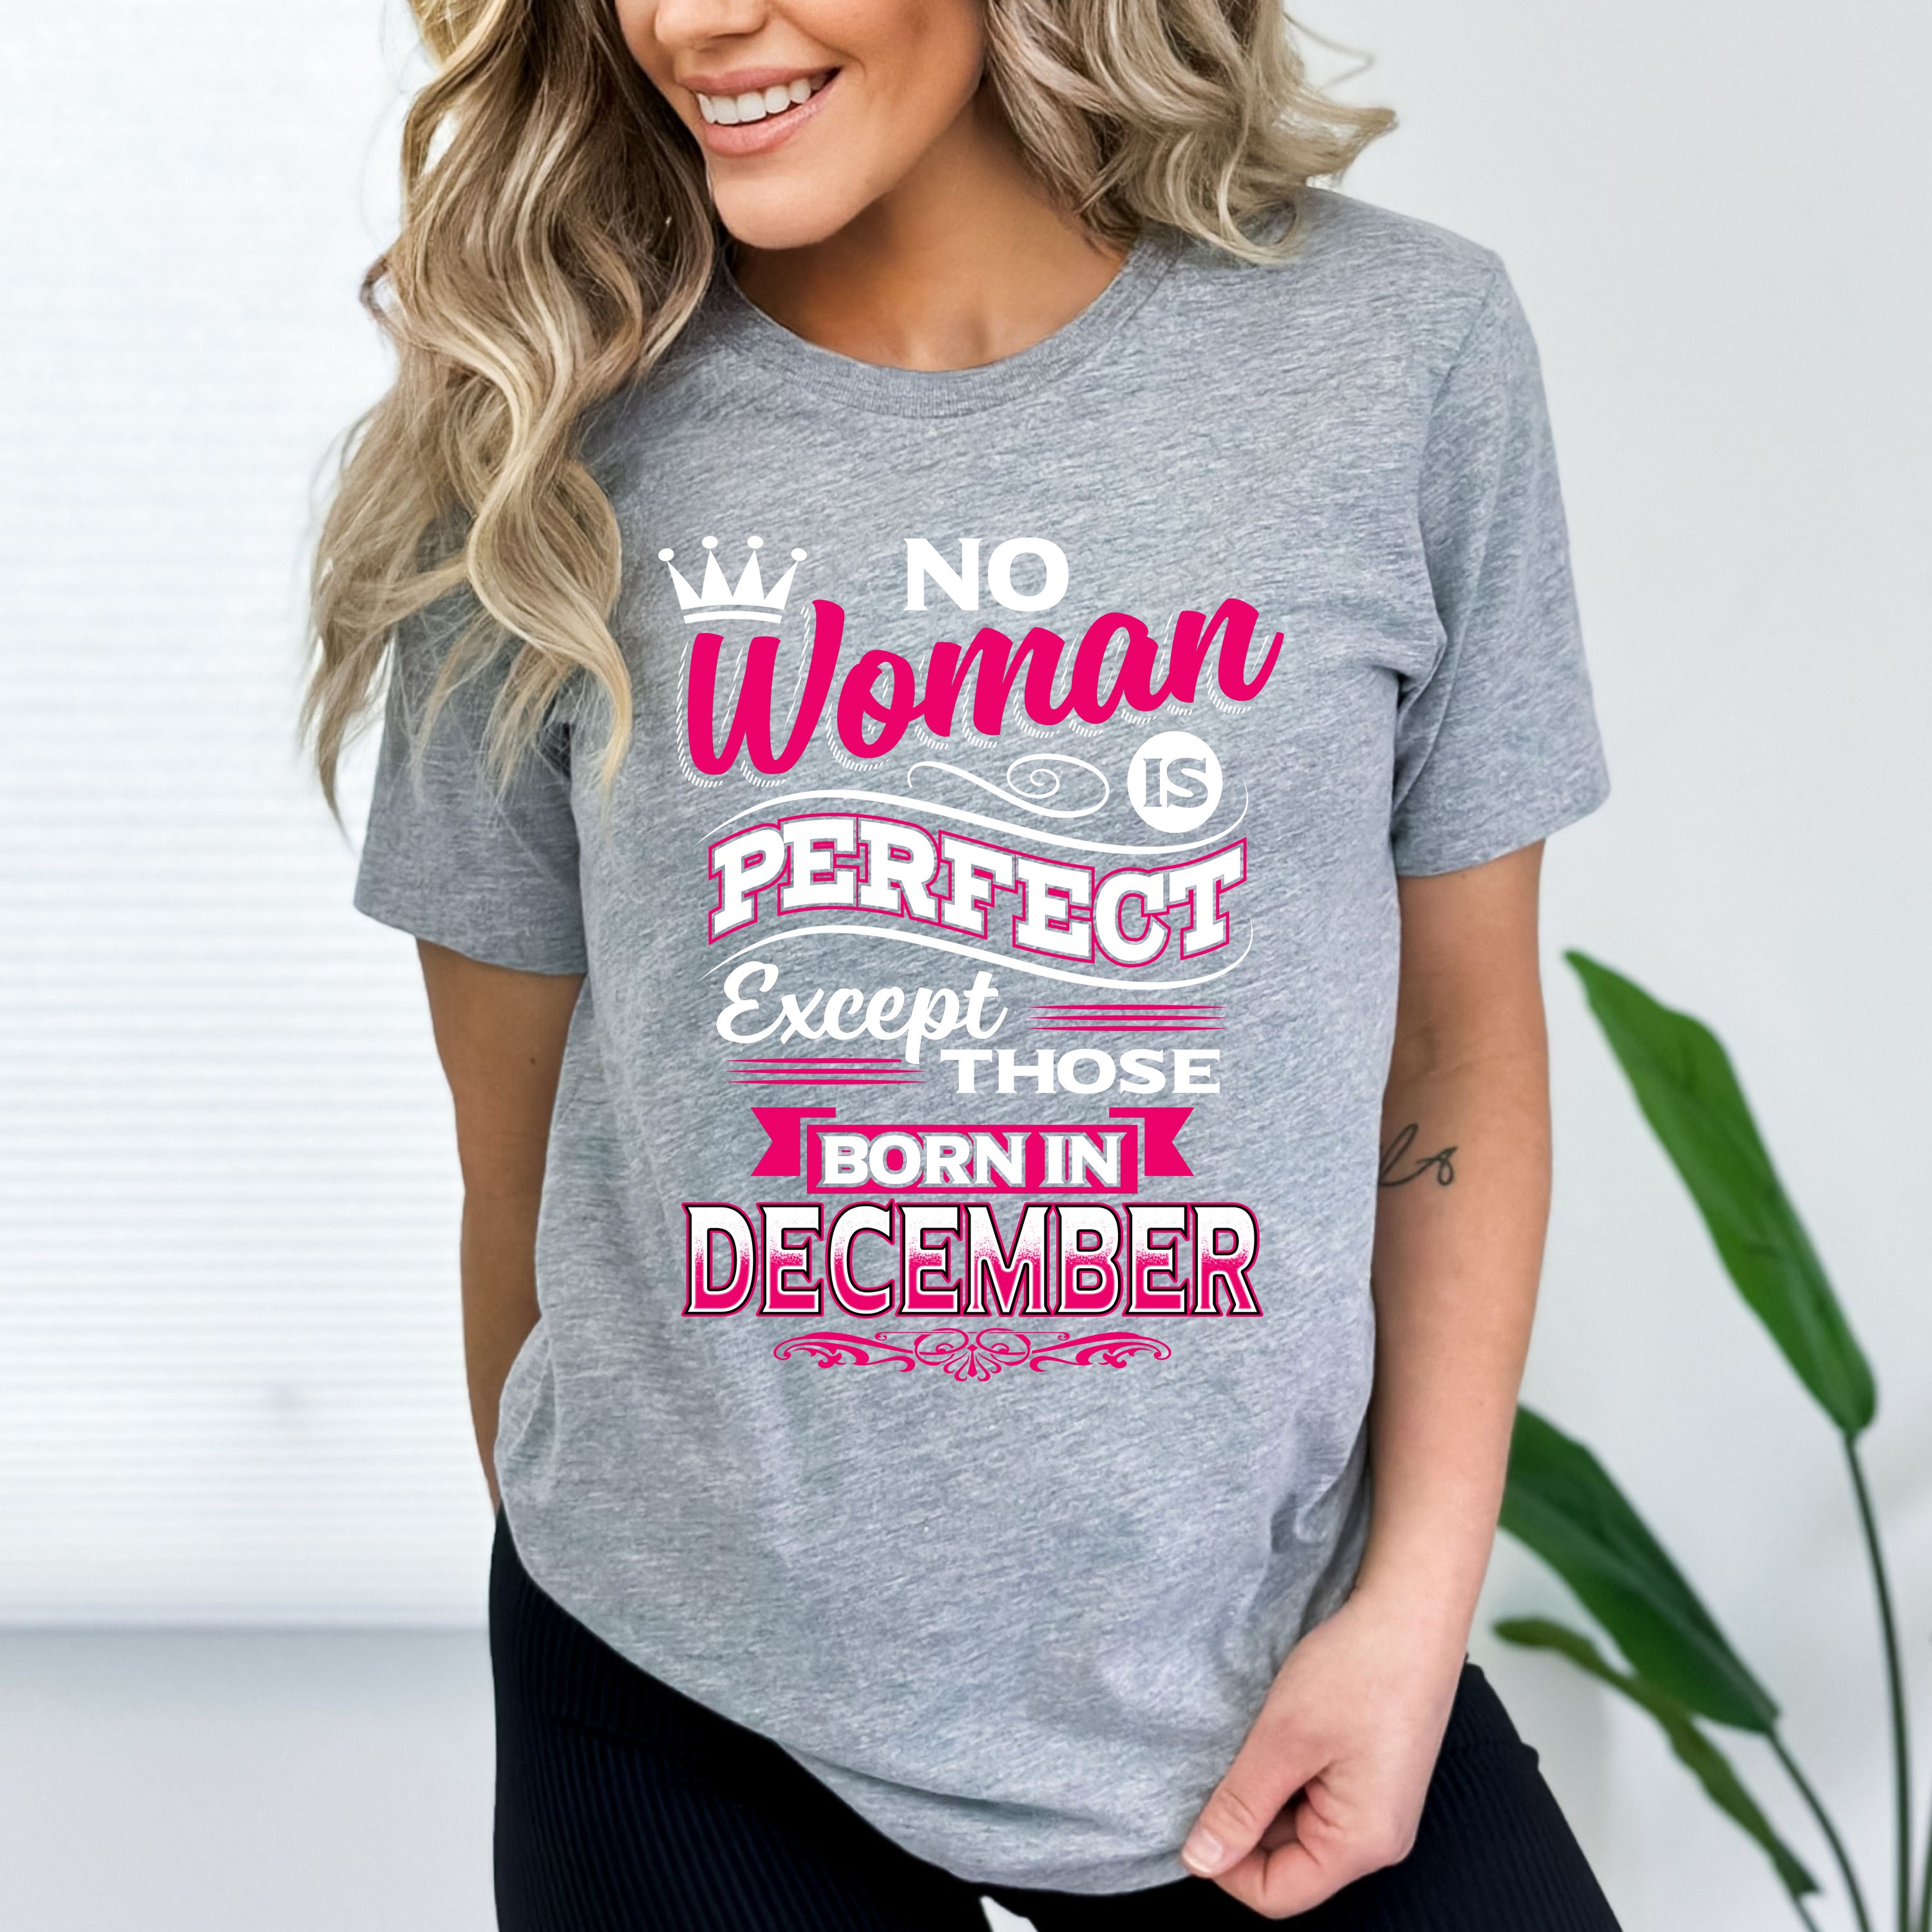 "No Woman Is Perfect Except Those Born In December"- Grey & Black